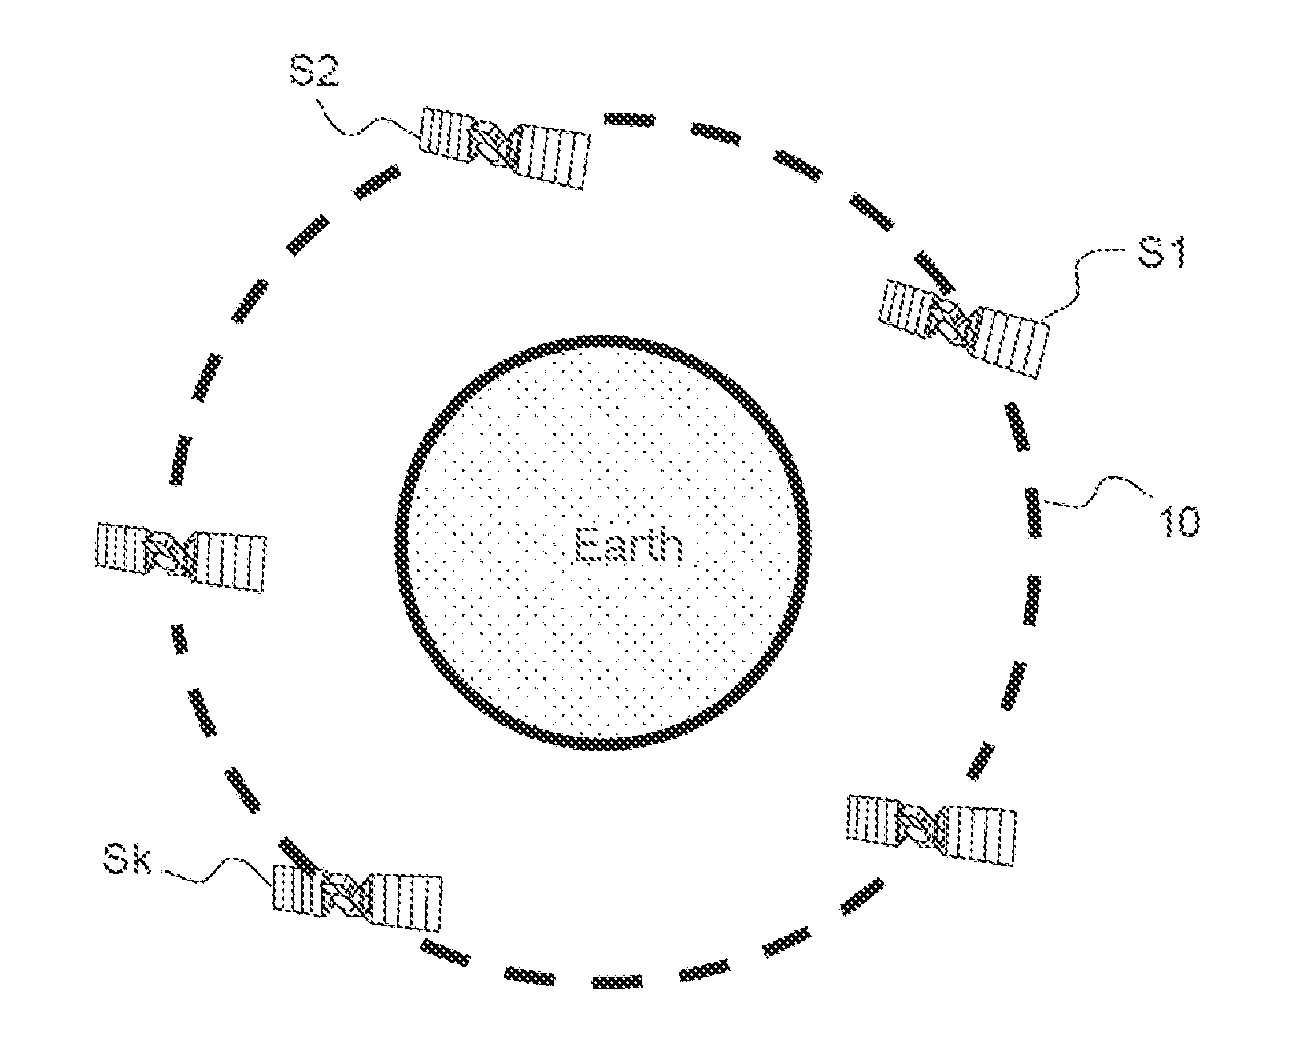 Satellite communication system for a continuous high-bitrate access service over a coverage area including at least one polar region